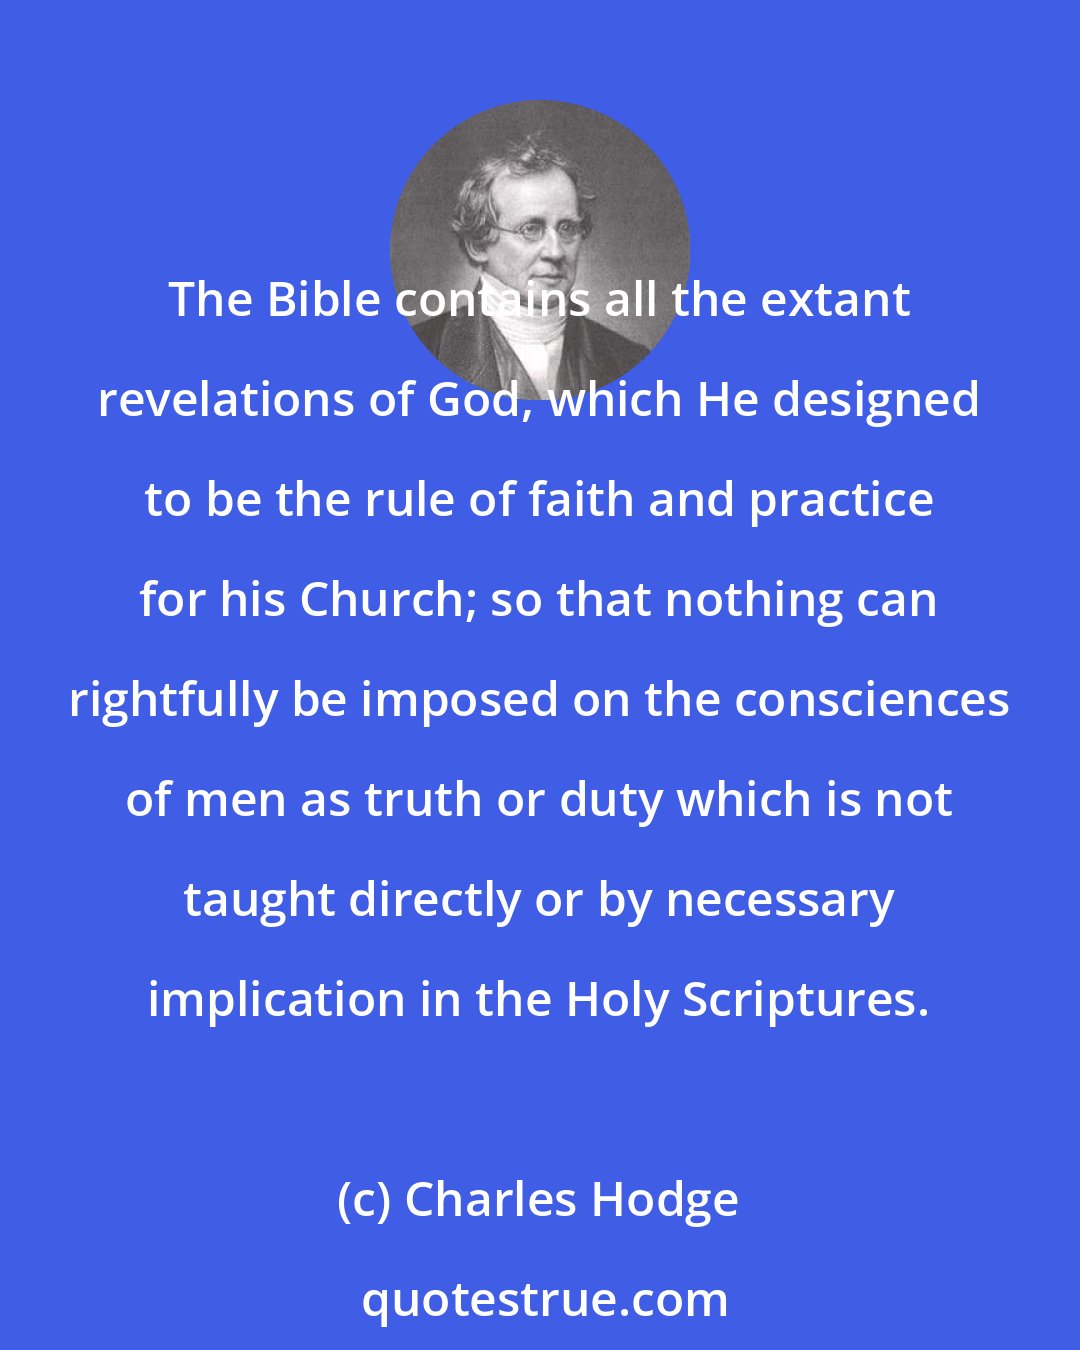 Charles Hodge: The Bible contains all the extant revelations of God, which He designed to be the rule of faith and practice for his Church; so that nothing can rightfully be imposed on the consciences of men as truth or duty which is not taught directly or by necessary implication in the Holy Scriptures.